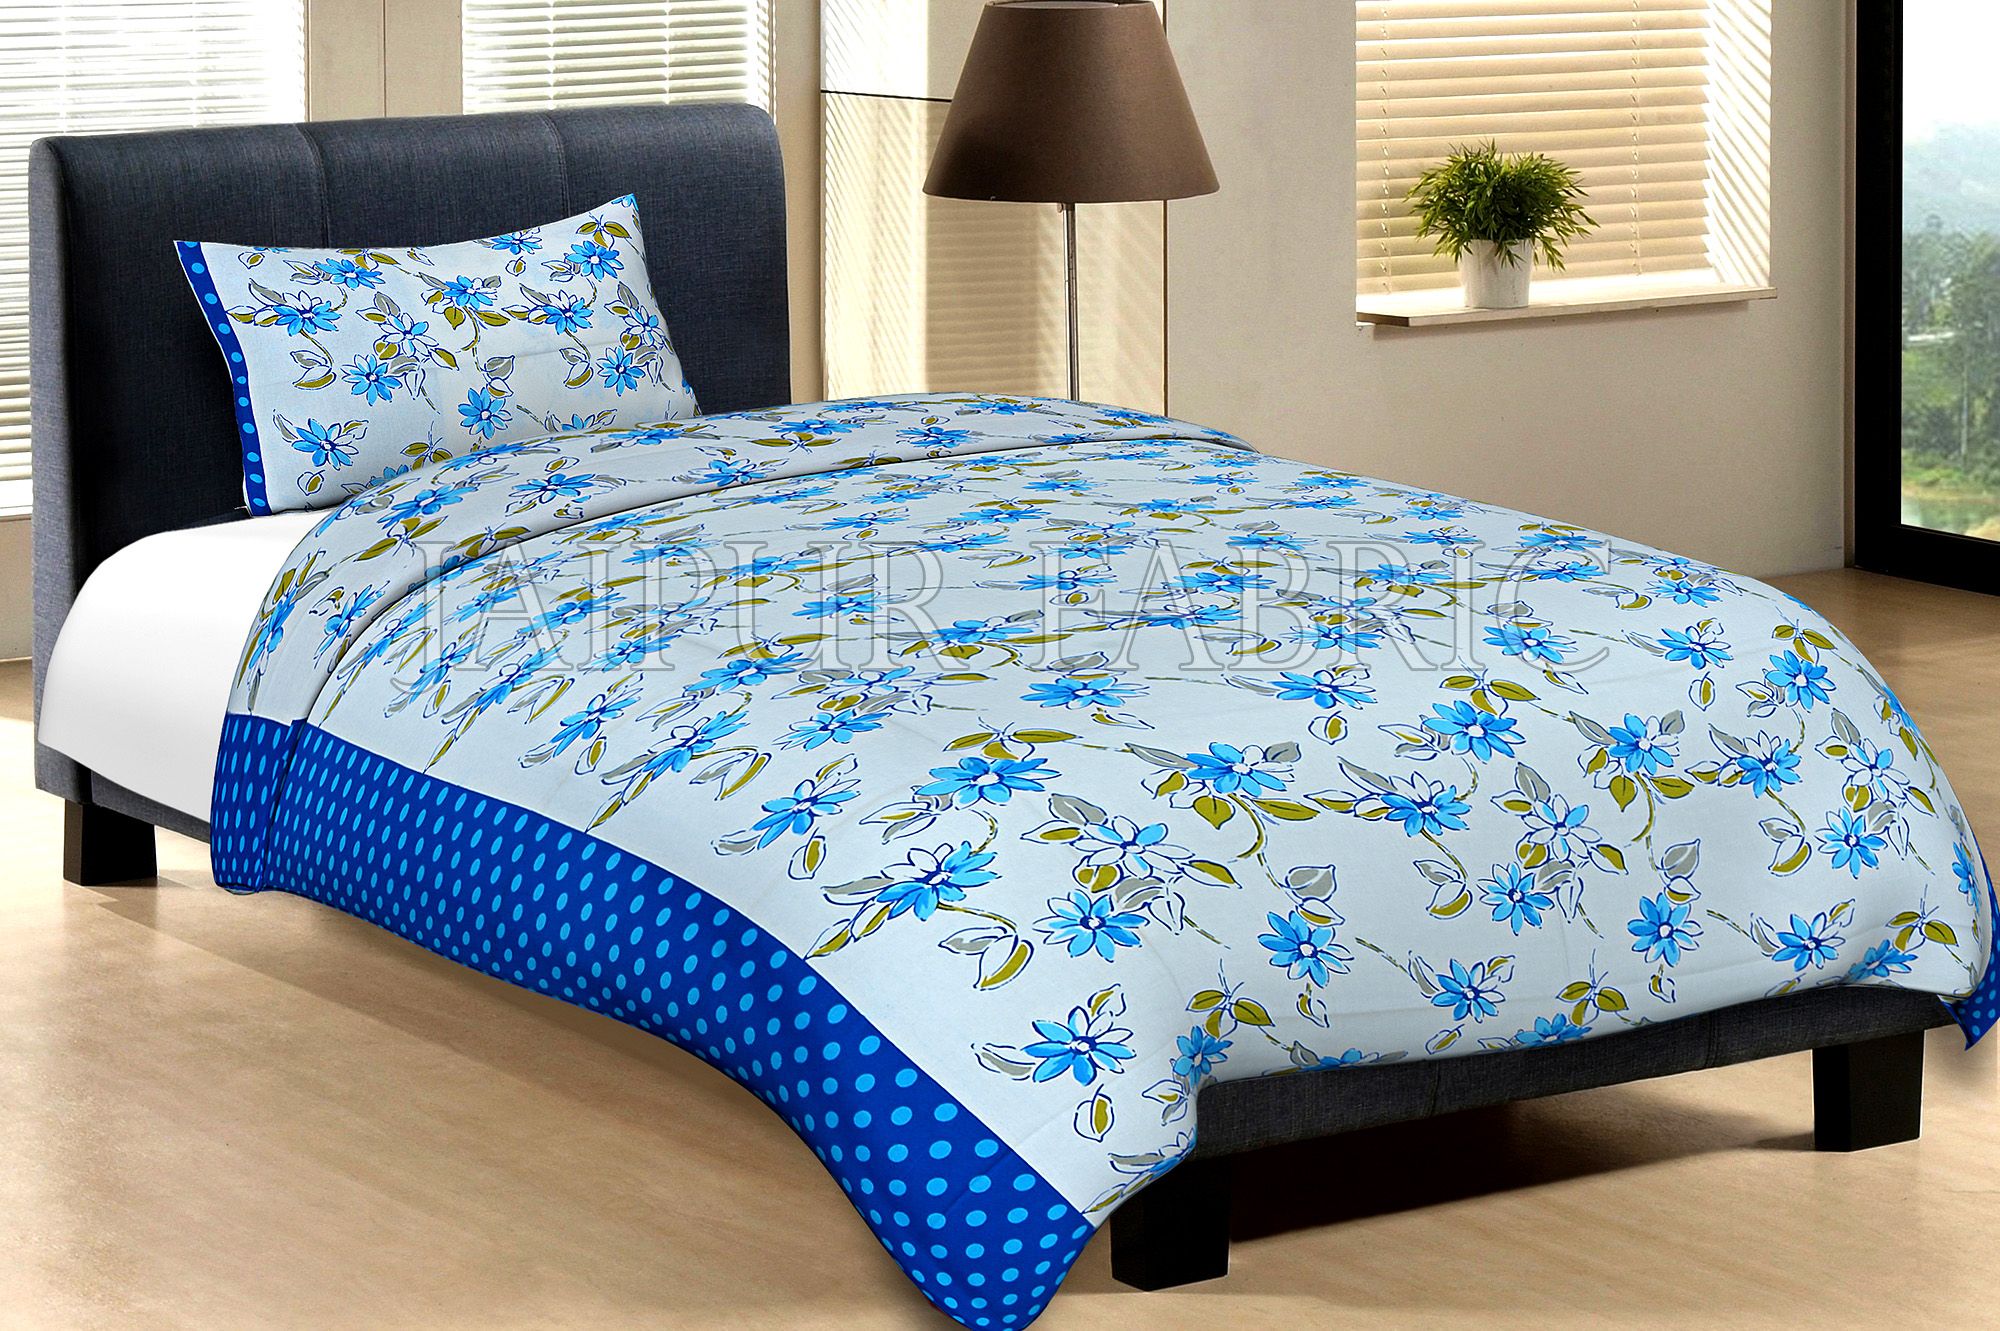 Blue Border With Light Blue  Polka Dot And White Base With Blue Flower Cotton Single Bed Sheet with 1 pillow Cover